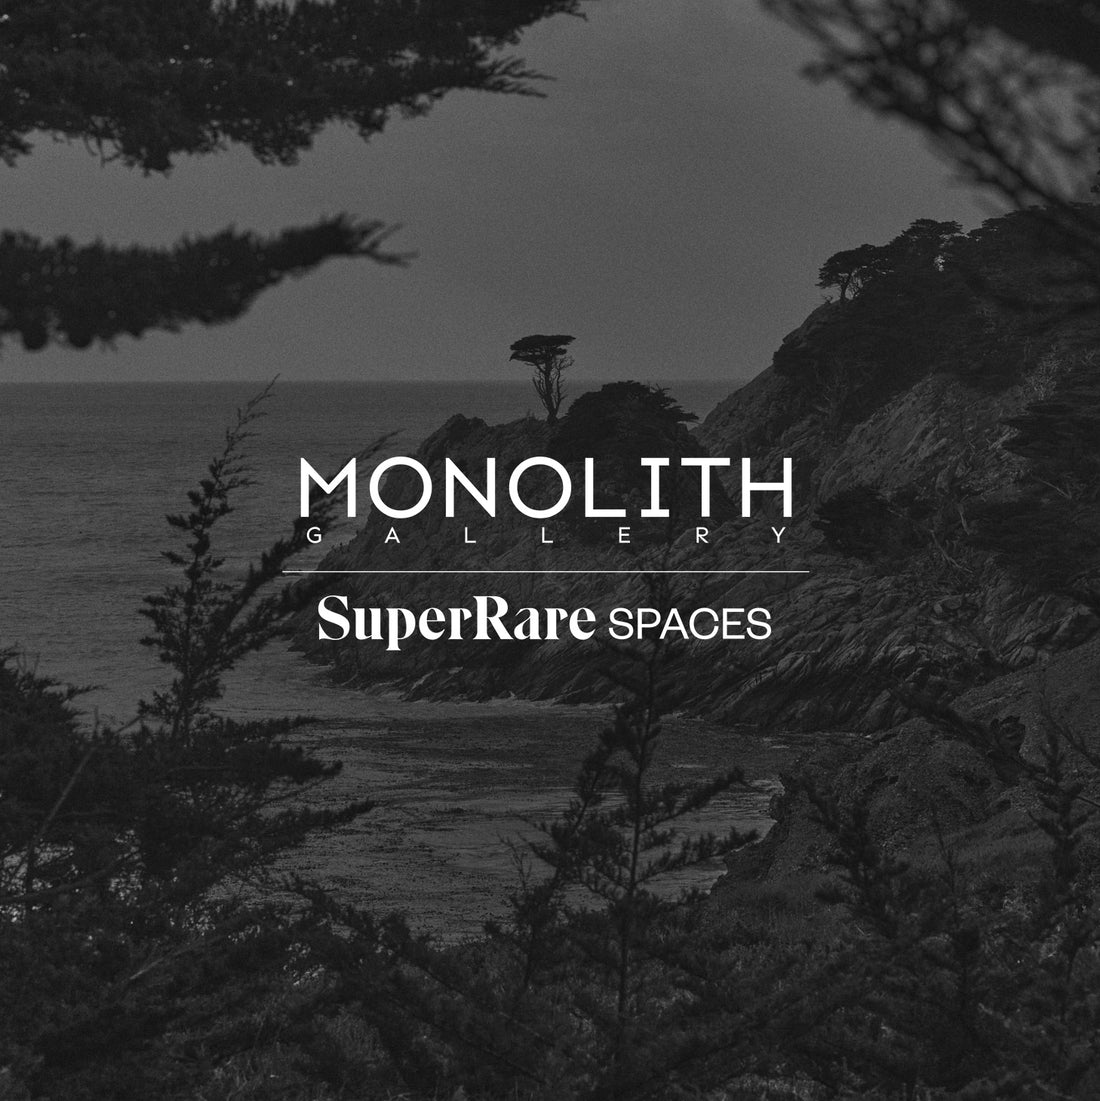 Monolith Gallery on SuperRare